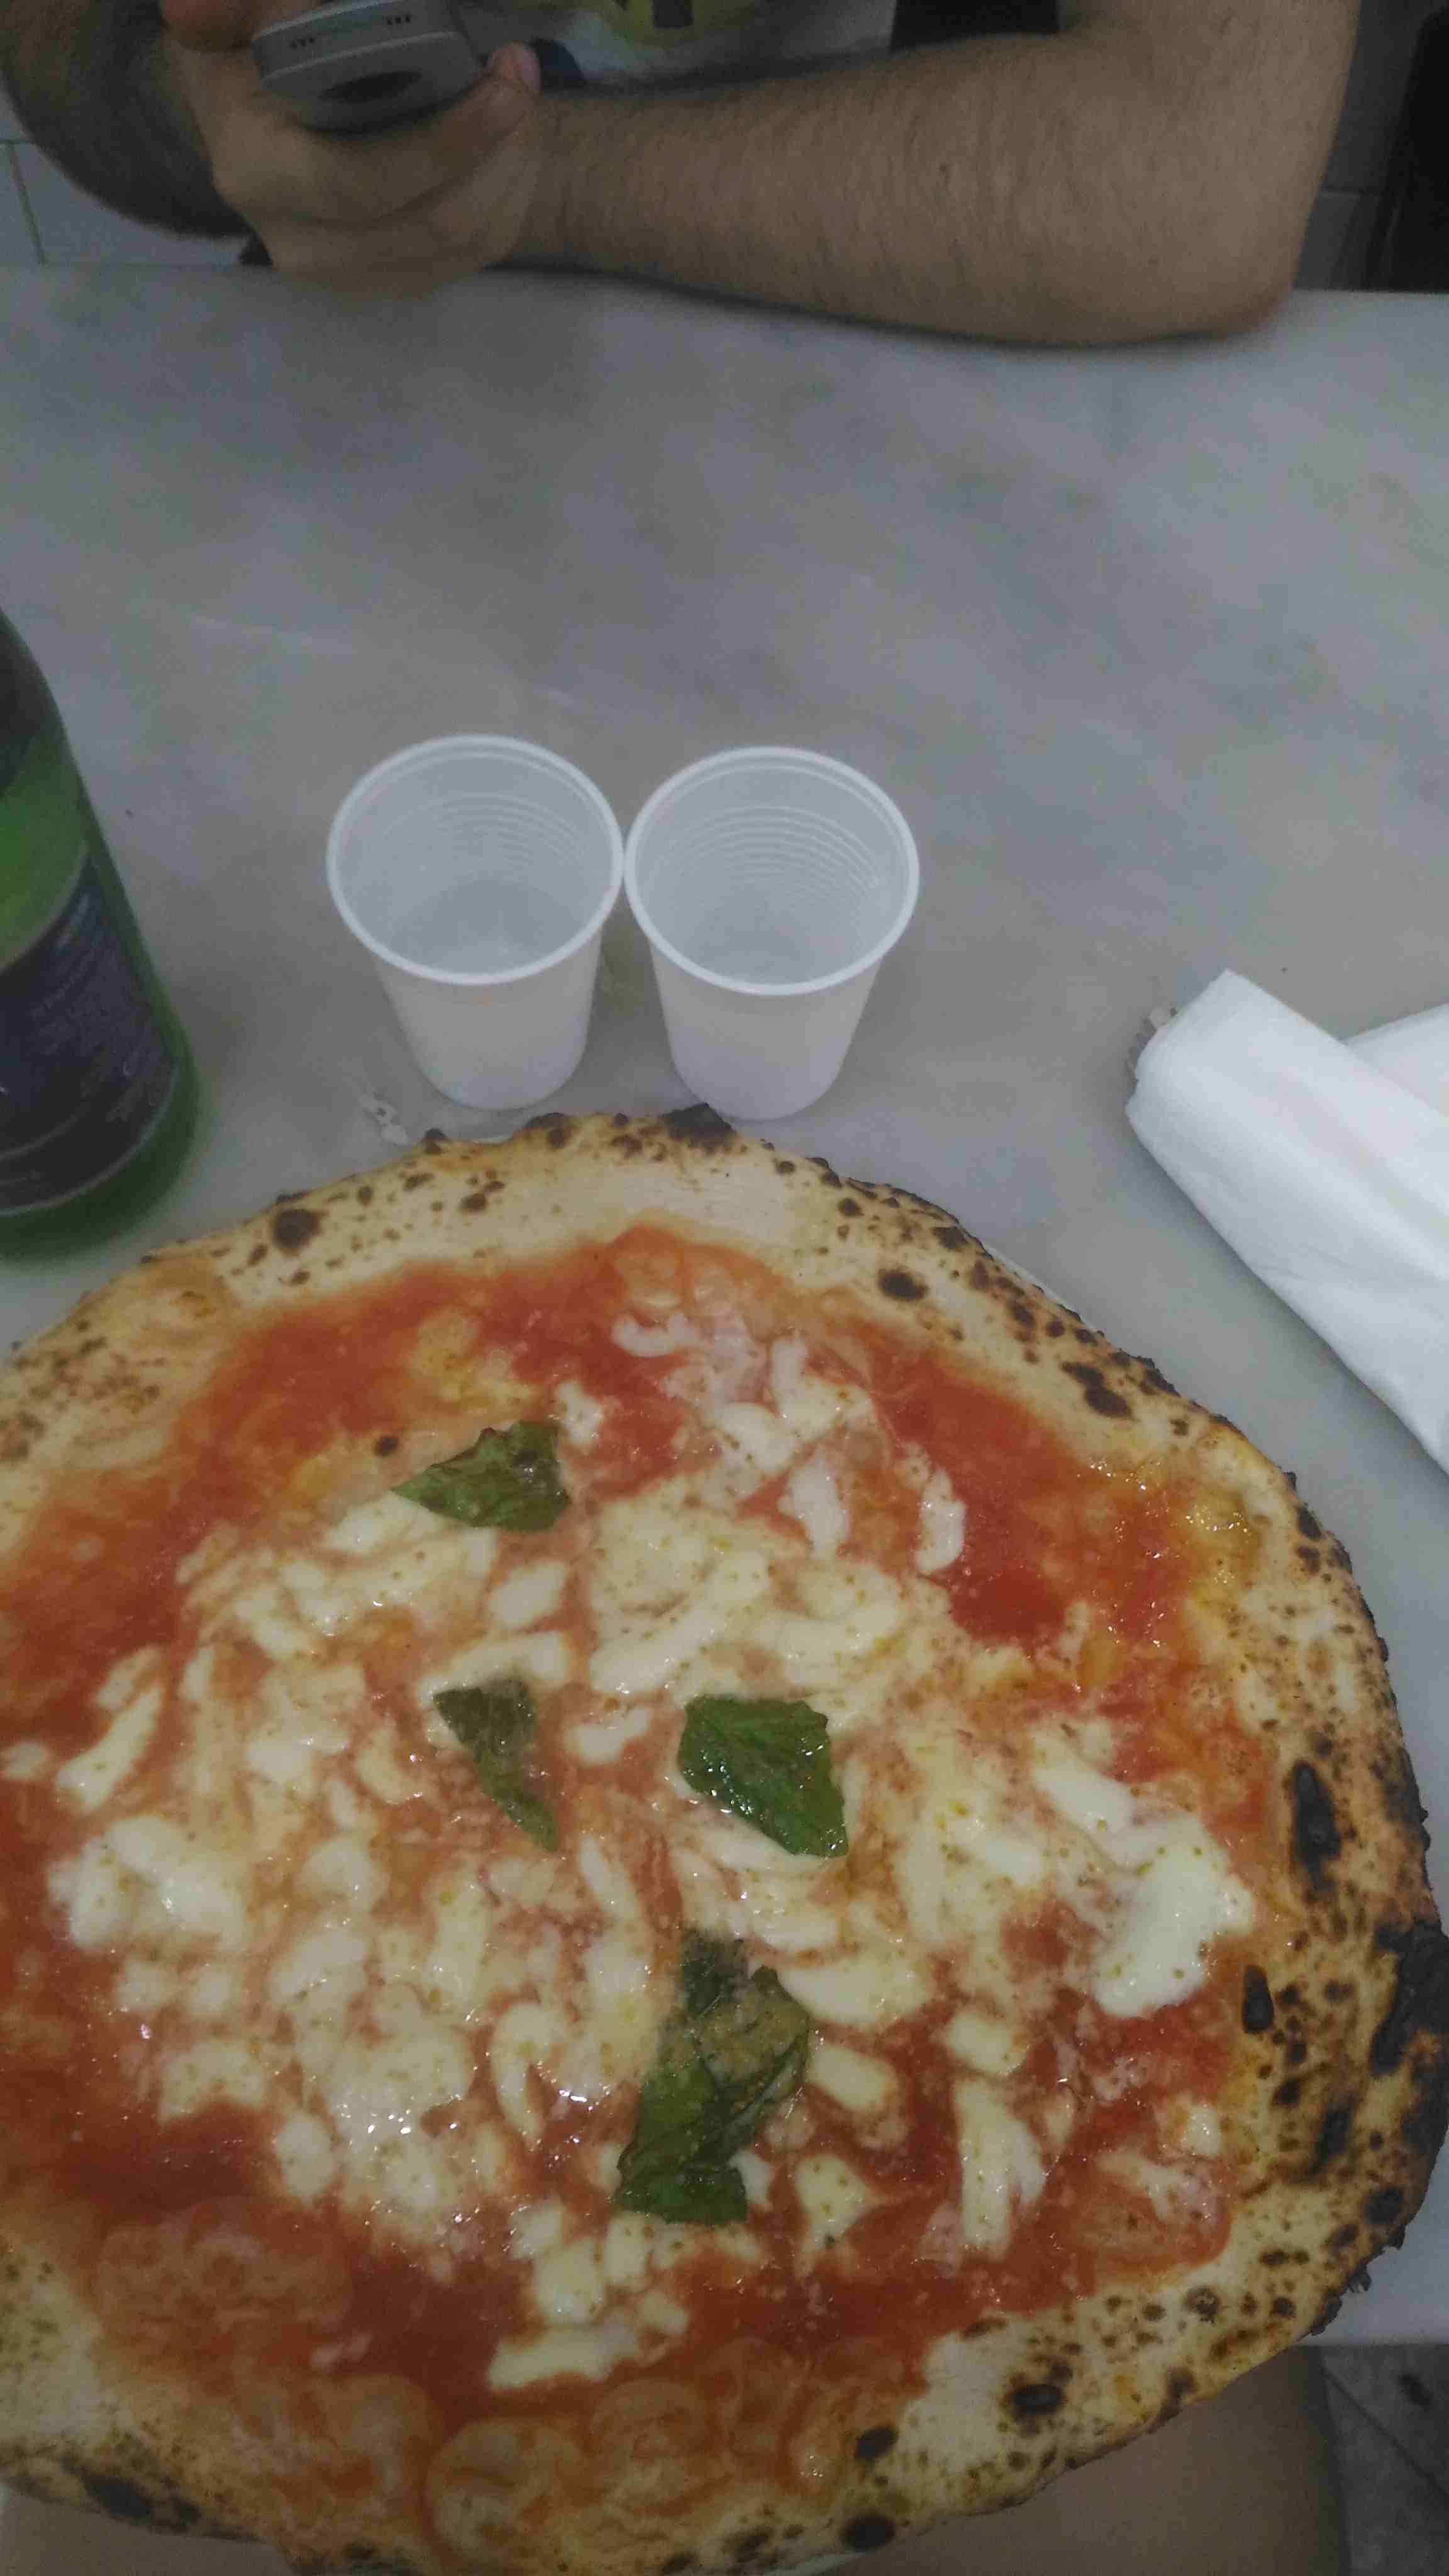 The best margherita pizza in the world.